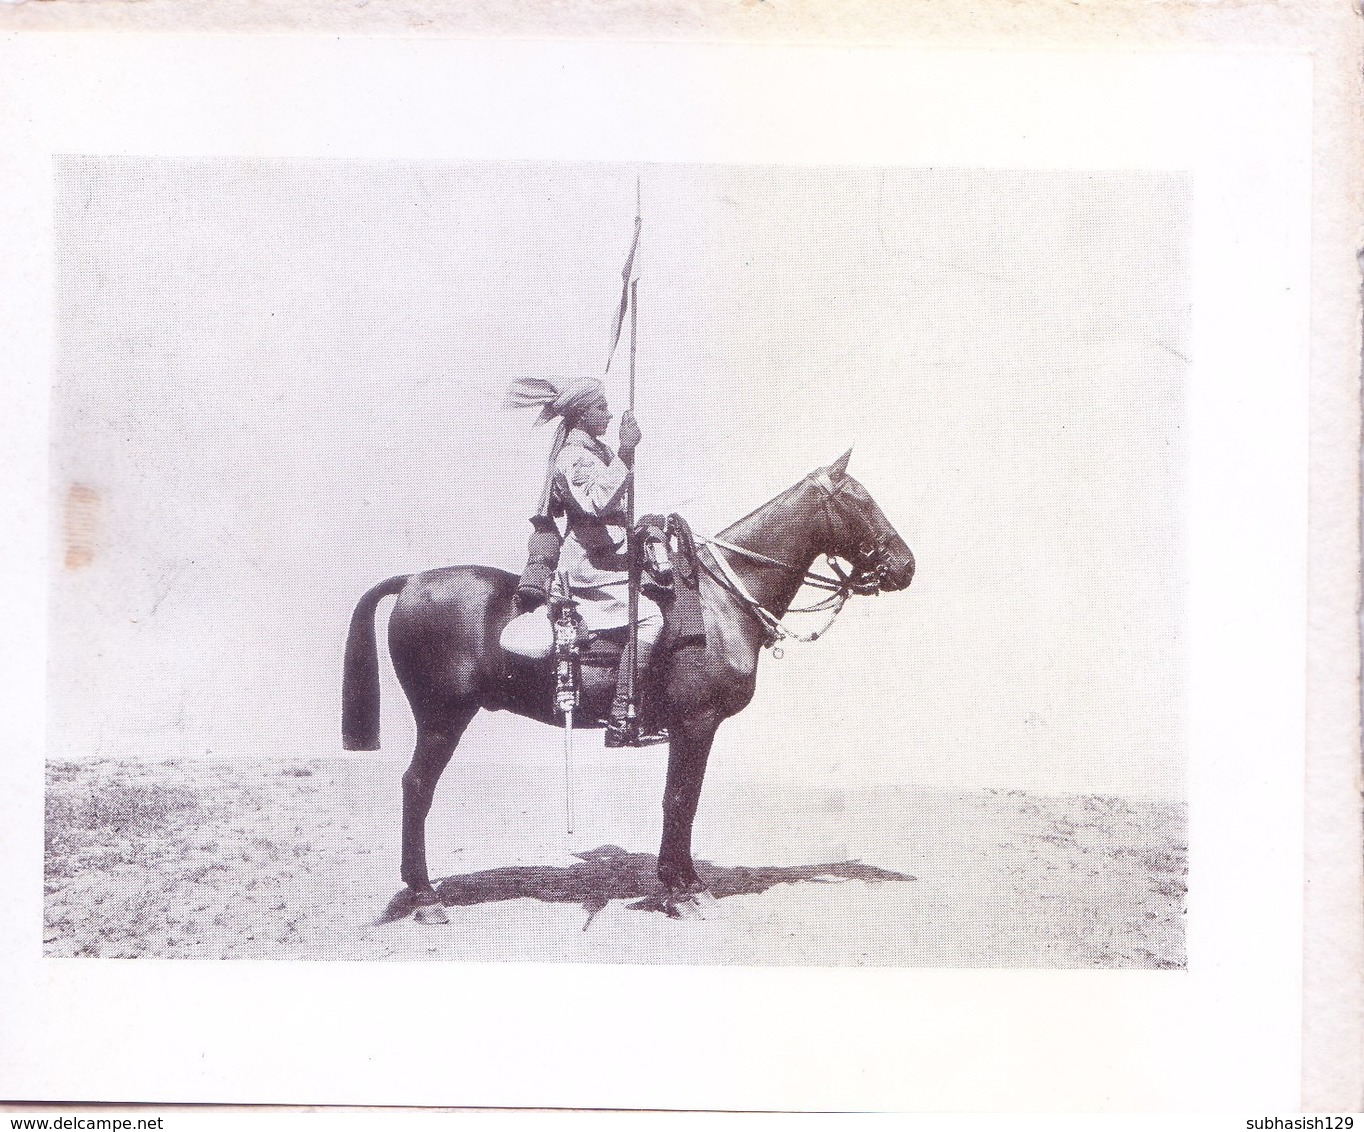 BRITISH INDIA : 1922 GREETINGS CARD : 20TH LANCERS, BRITISH INDIAN ARMY : PHOTO OF A SOLDIER RIDING ON HORSE - Documents